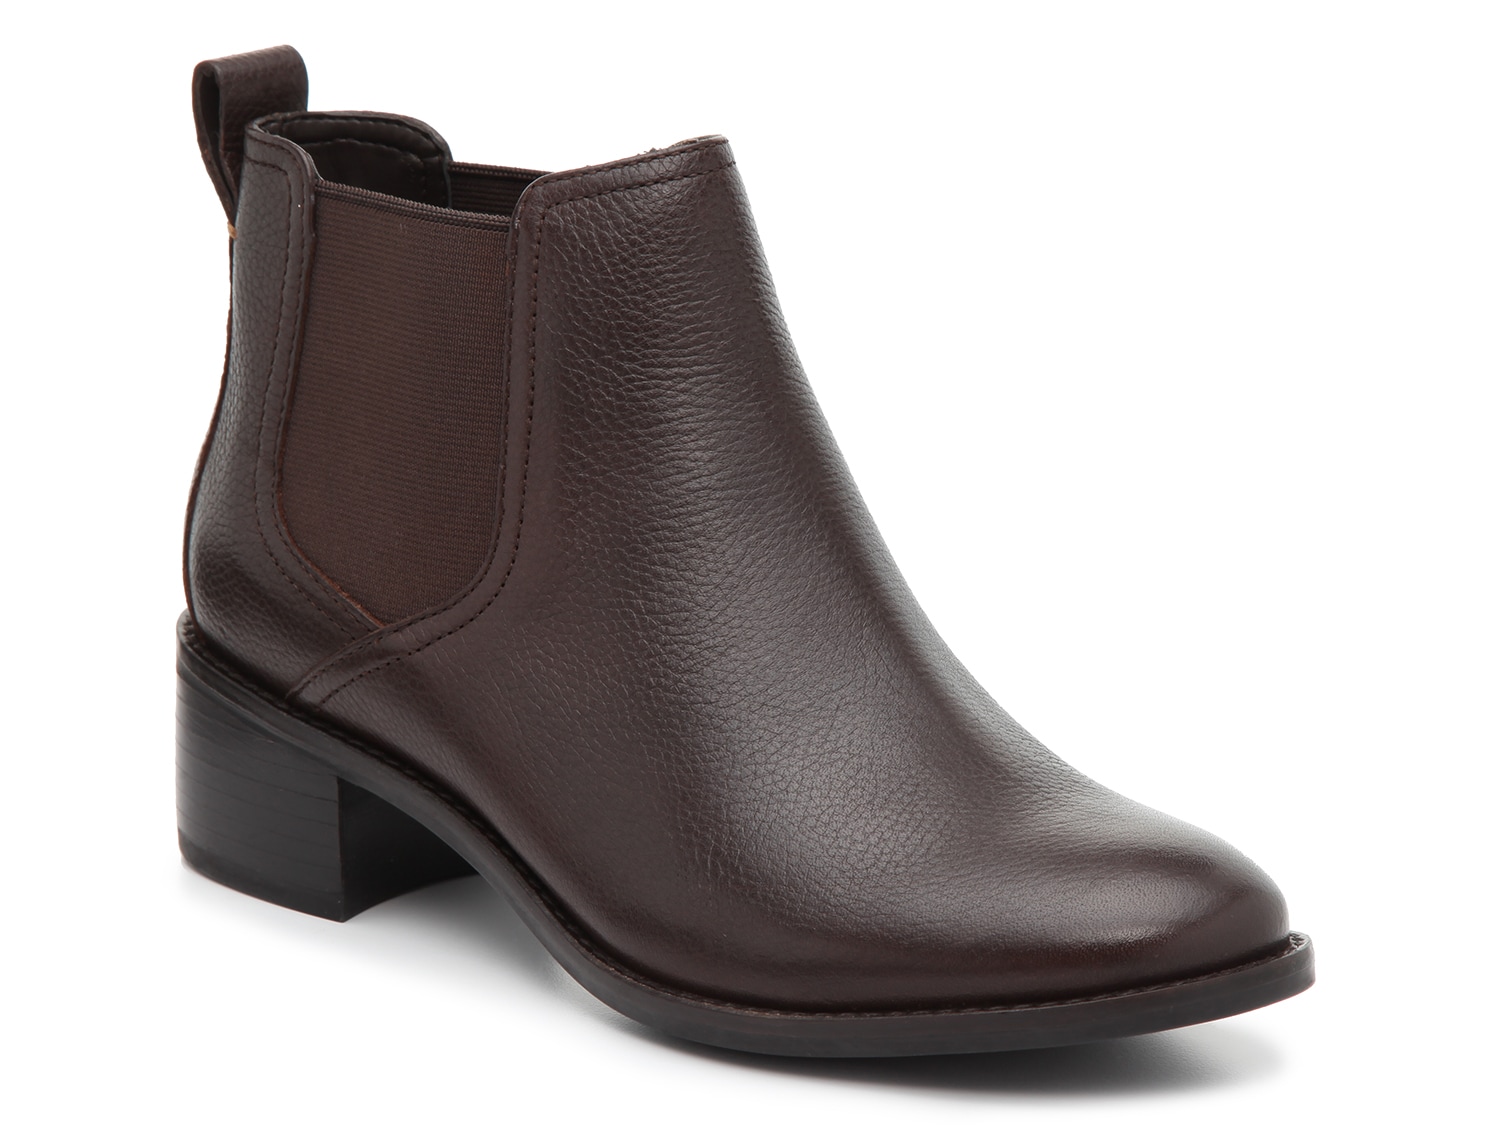 2 inch chelsea boots